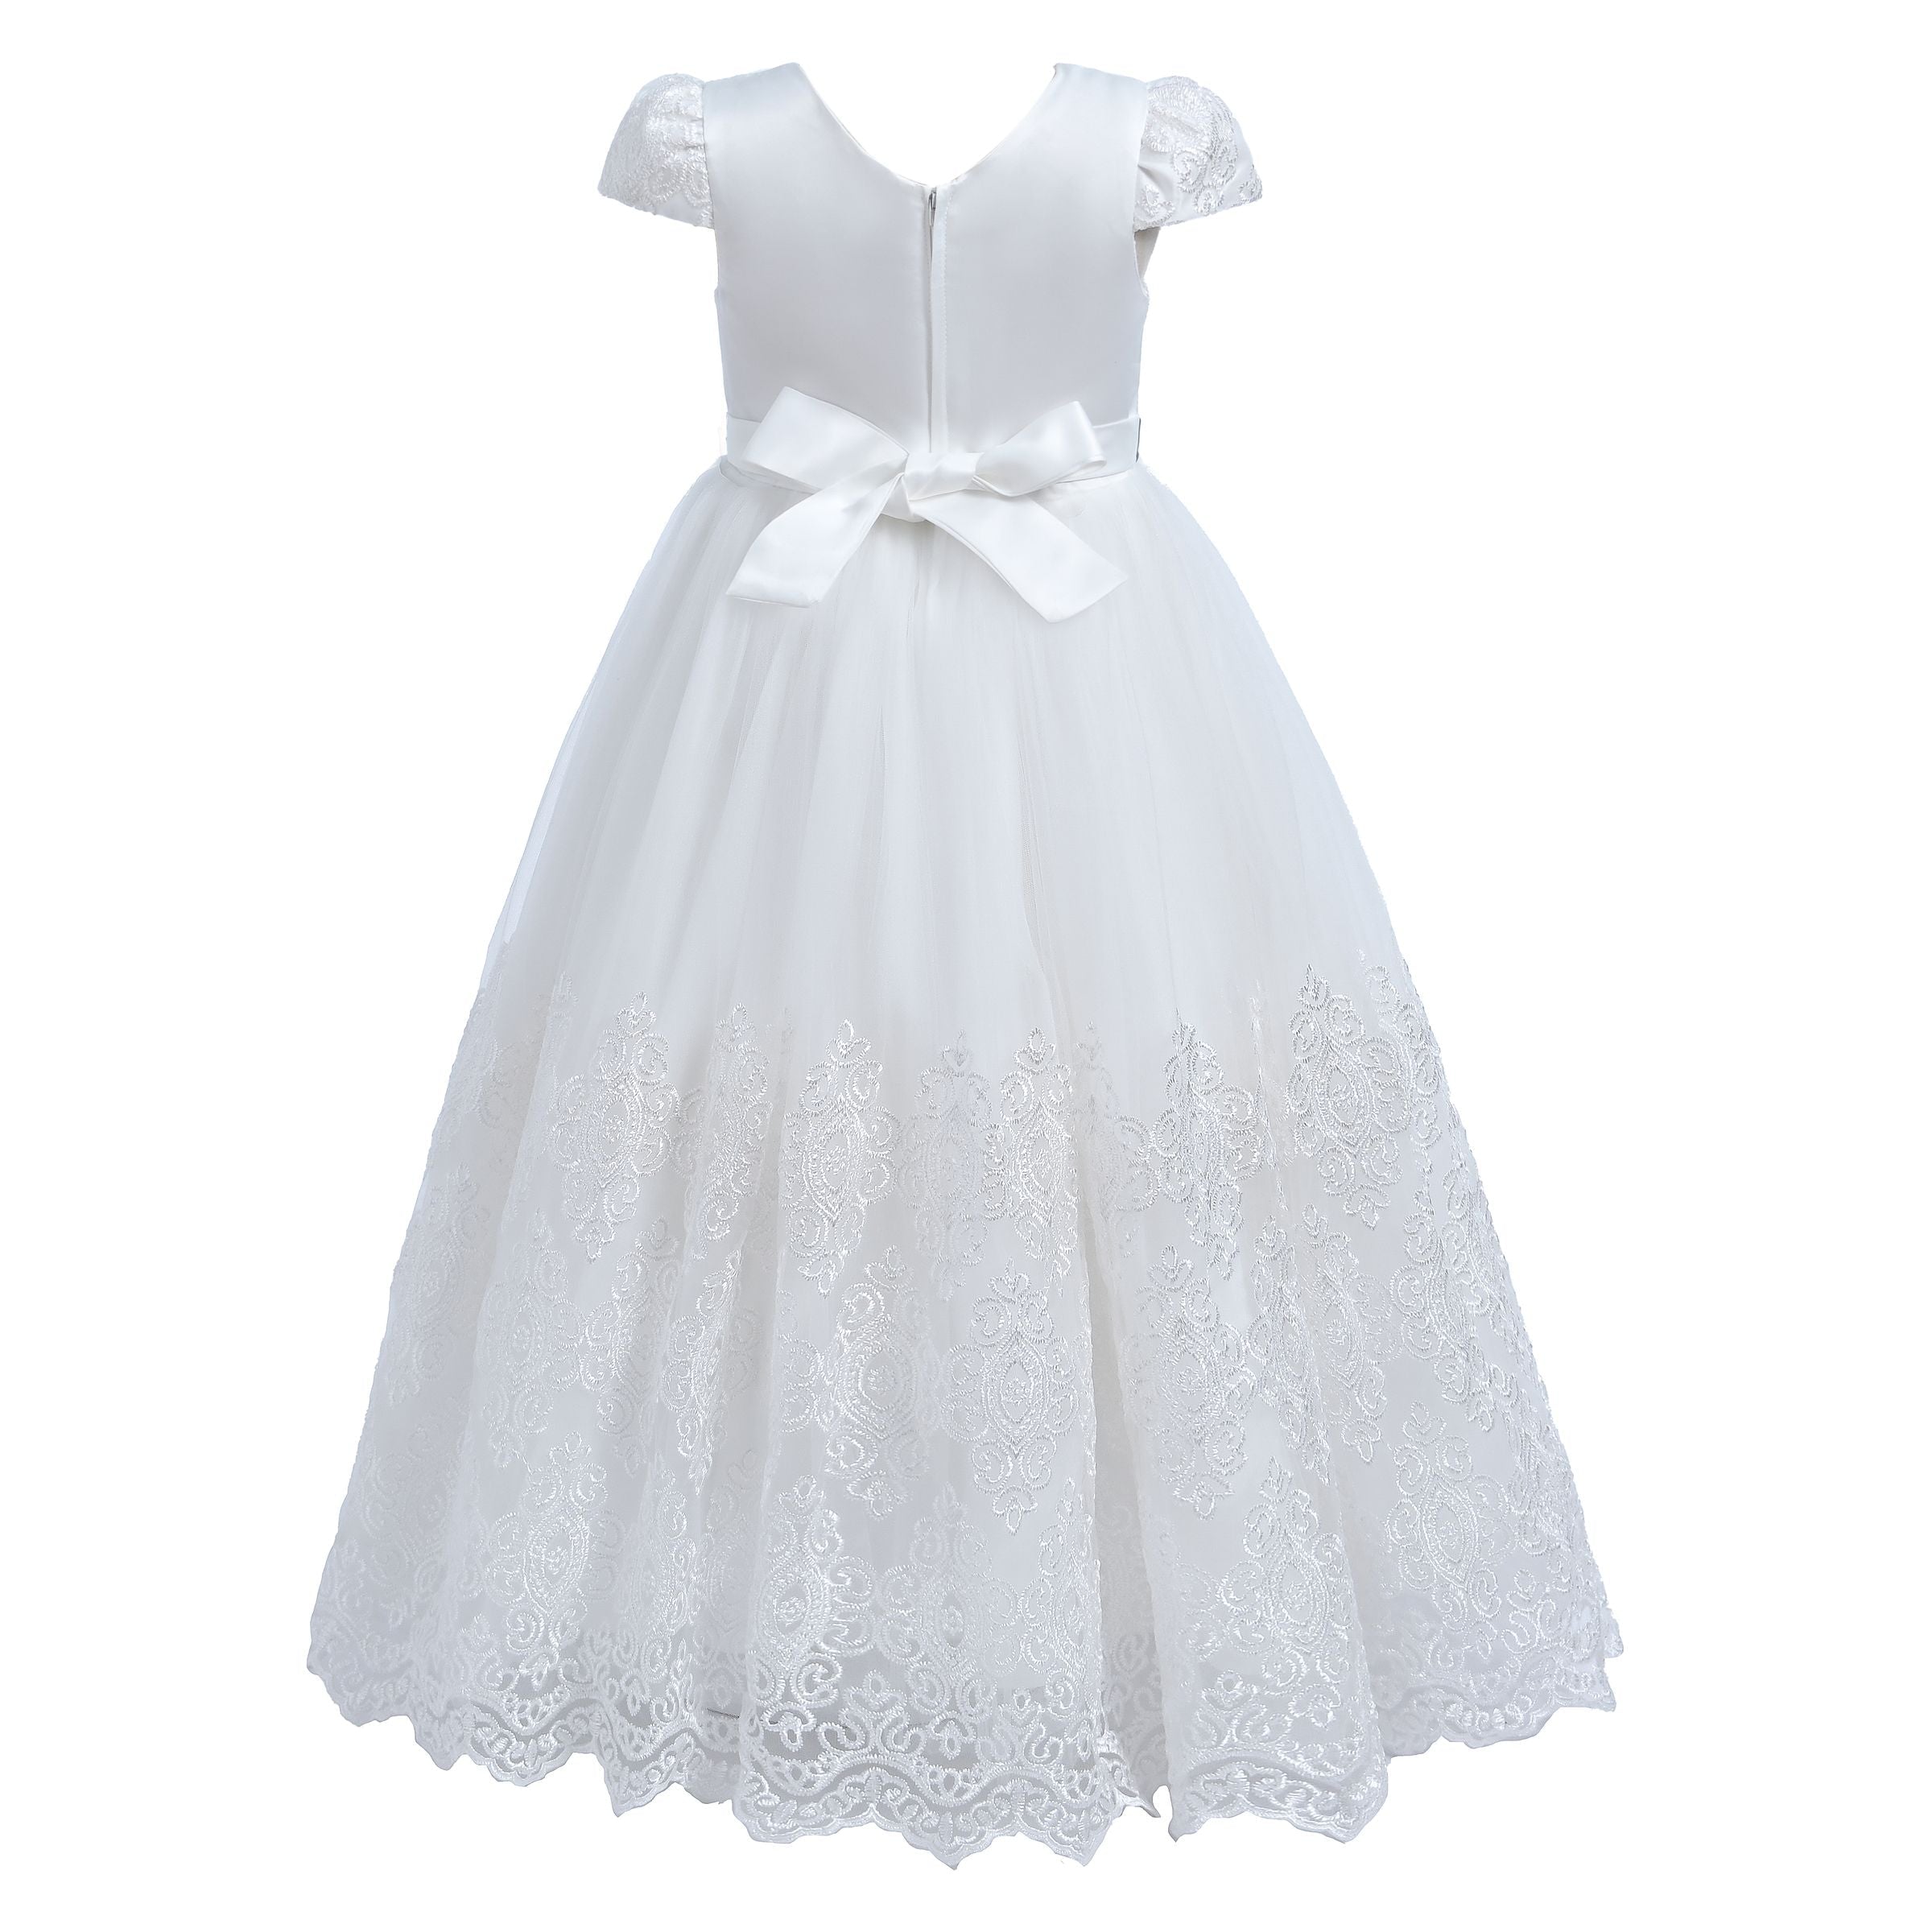 kids-atelier-tulleen-kid-girl-white-beaumont-teacup-gown-tcc6701